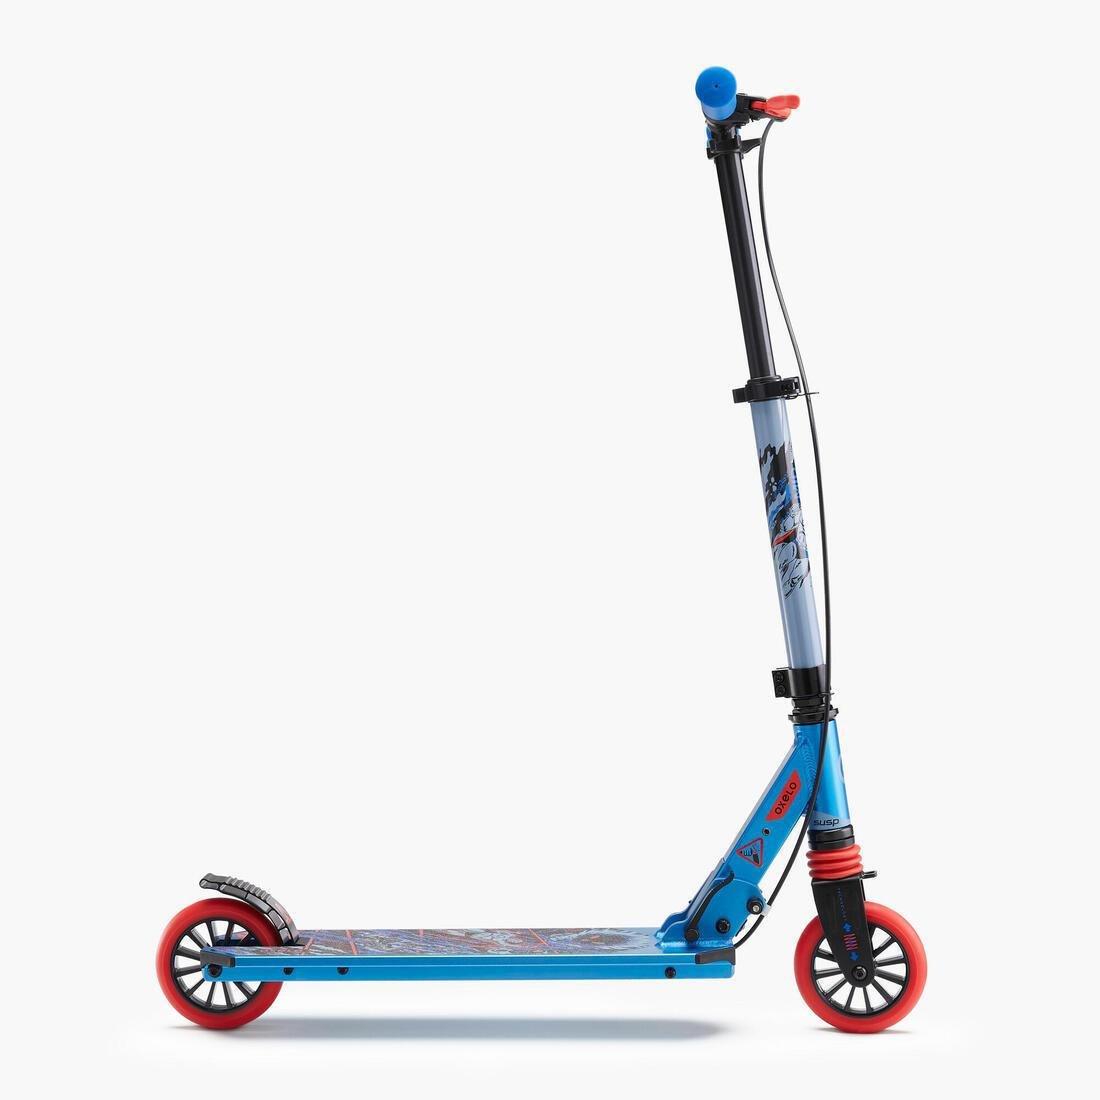 OXELO - MID5 Kids' Scooter with Handlebar Brake and Suspension, Tribal Graphic, Blue